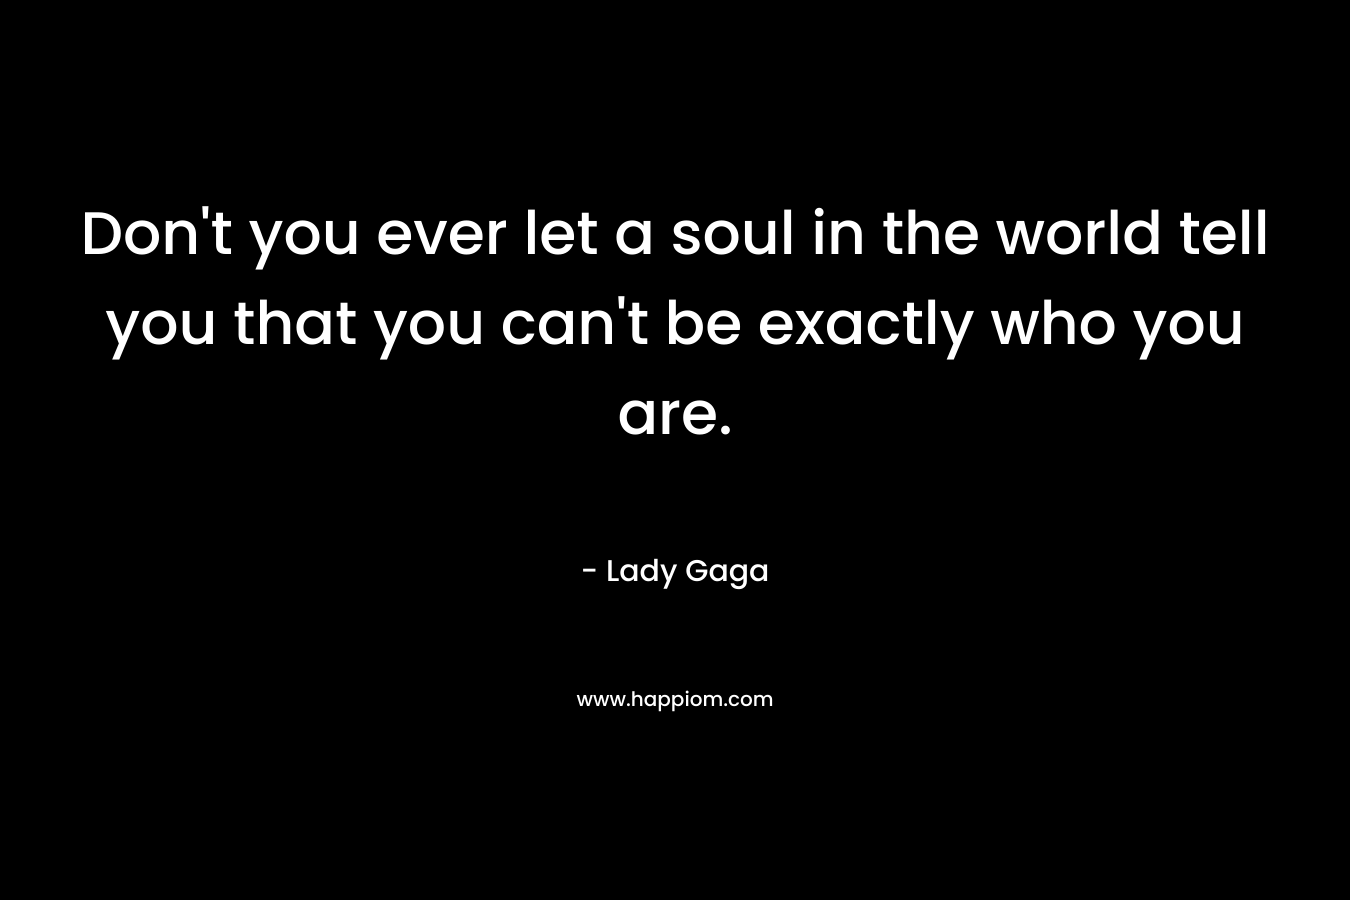 Don’t you ever let a soul in the world tell you that you can’t be exactly who you are. – Lady Gaga